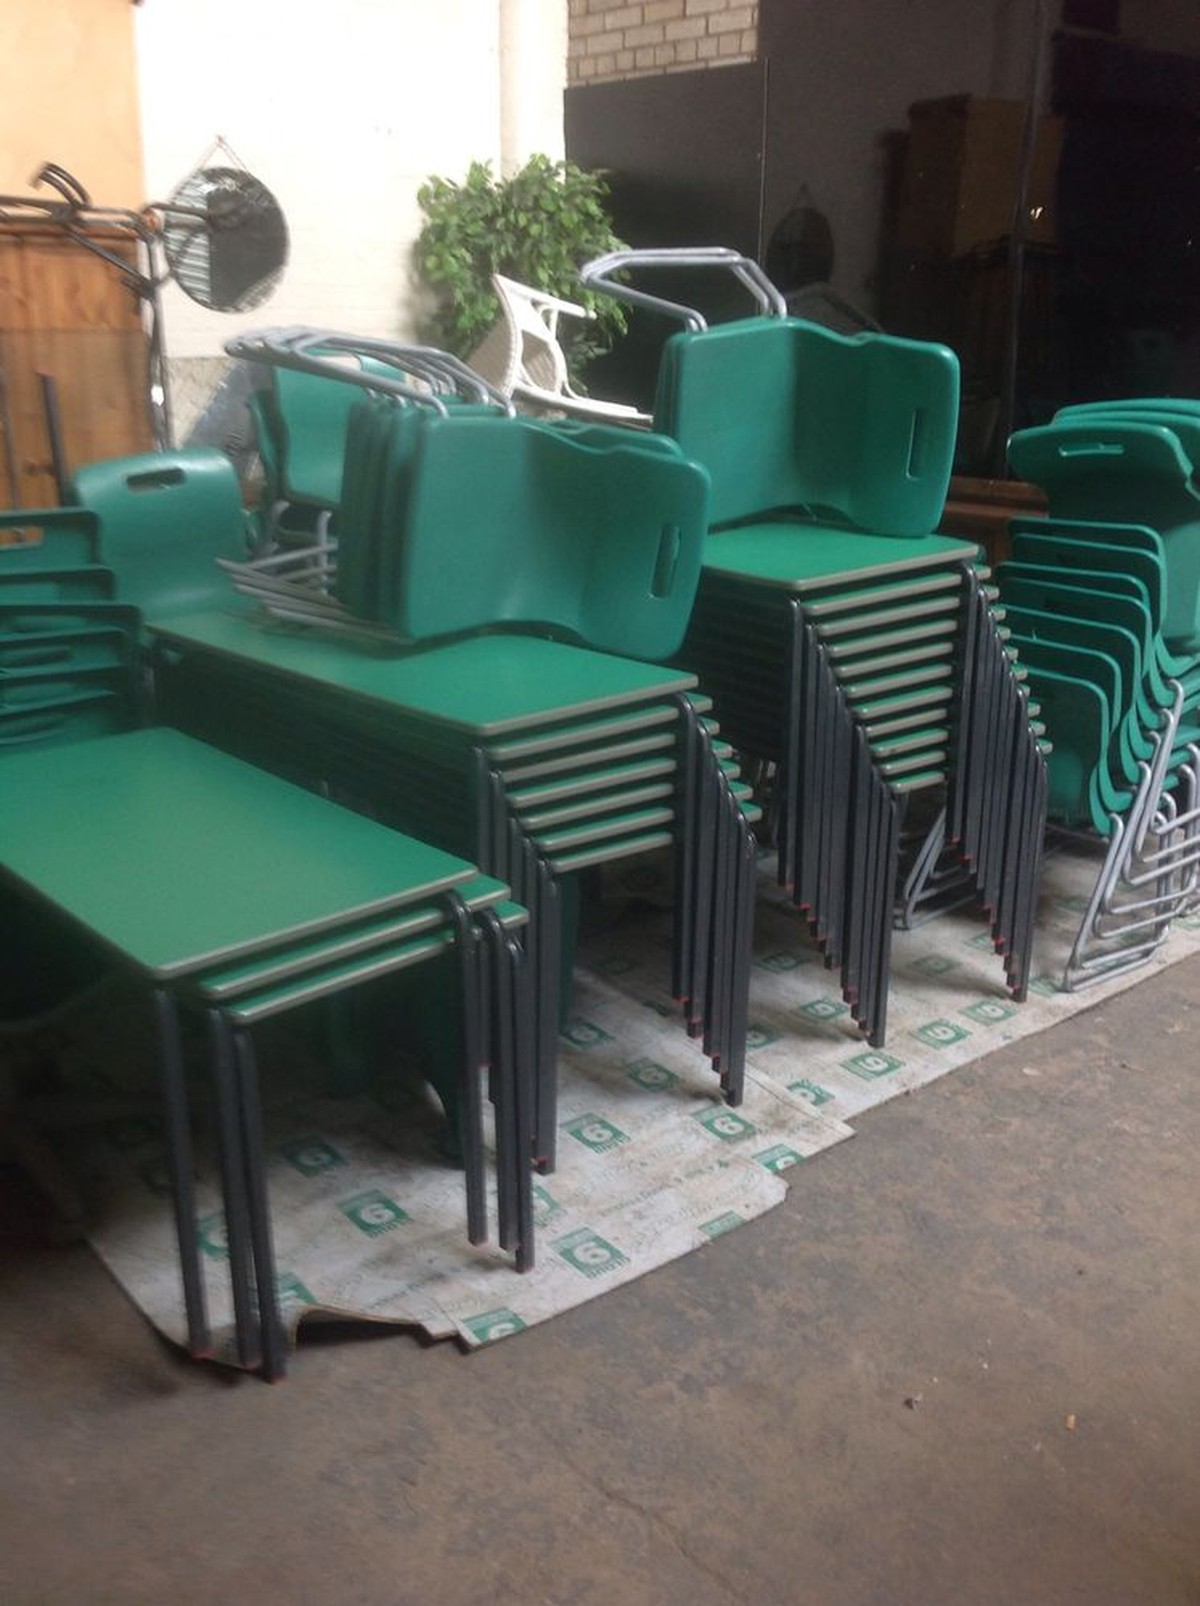 Secondhand Chairs And Tables School Playgroup And Nursery